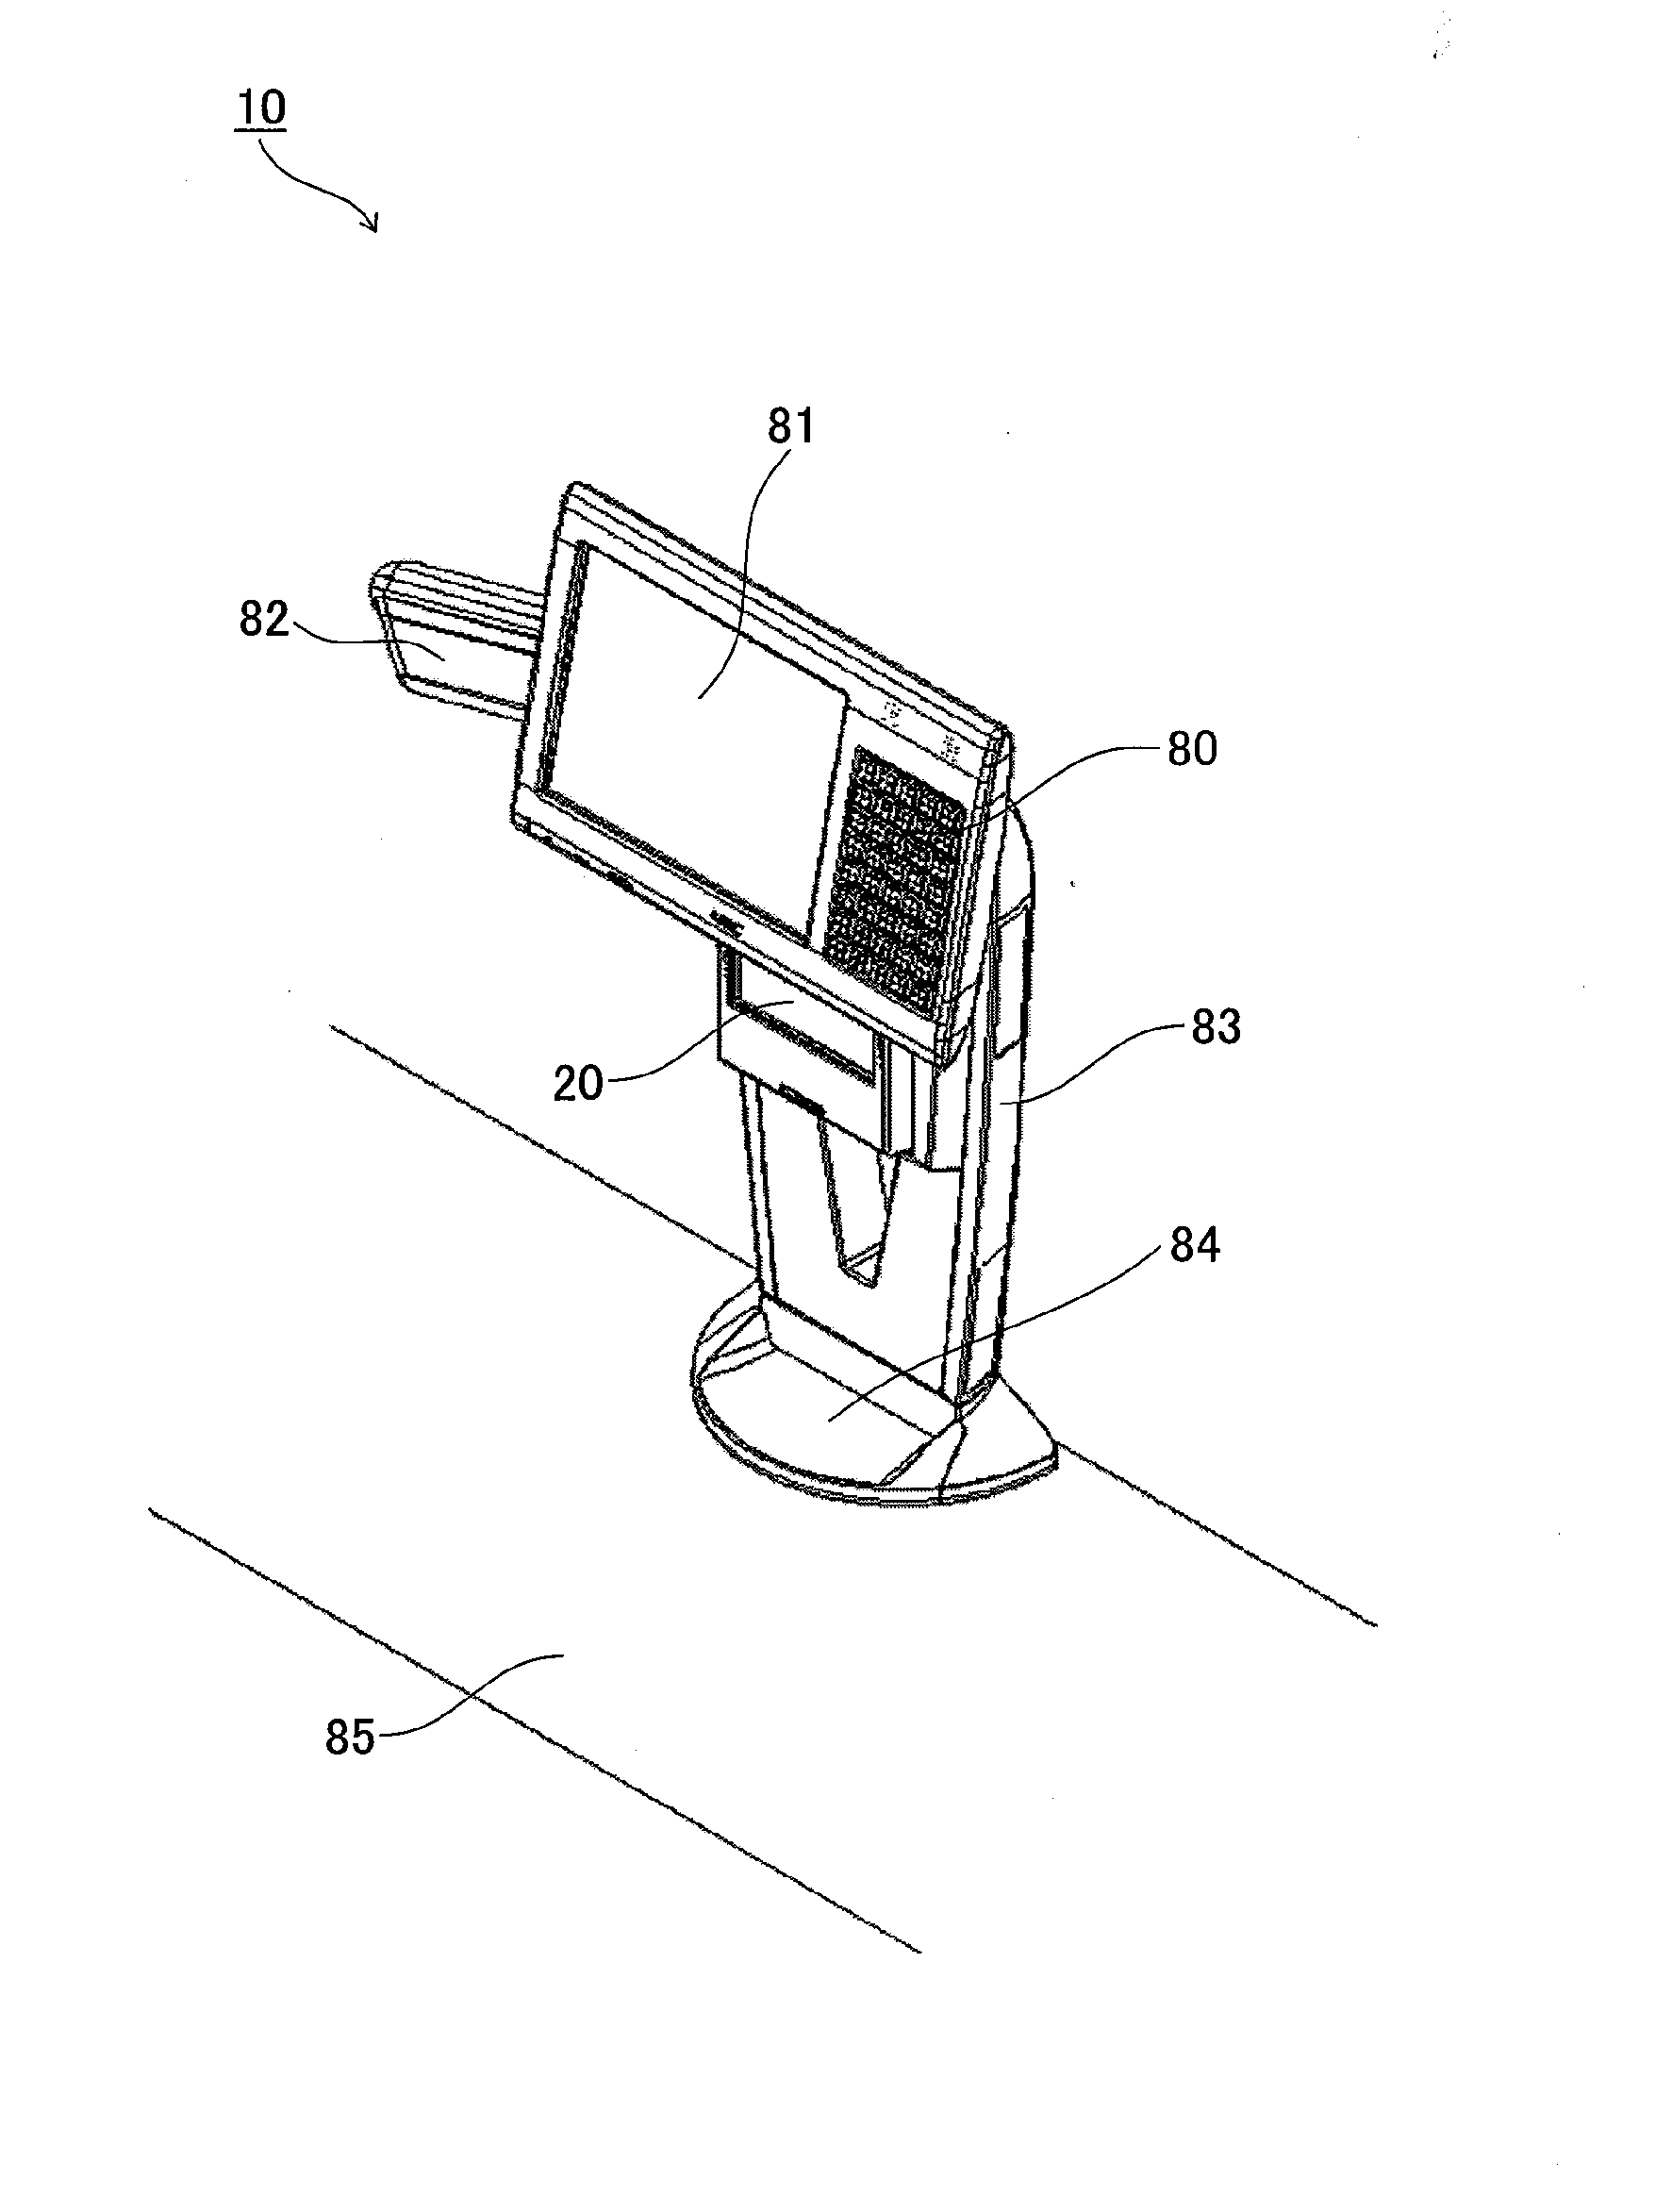 Stationary scanner apparatus with image scanner